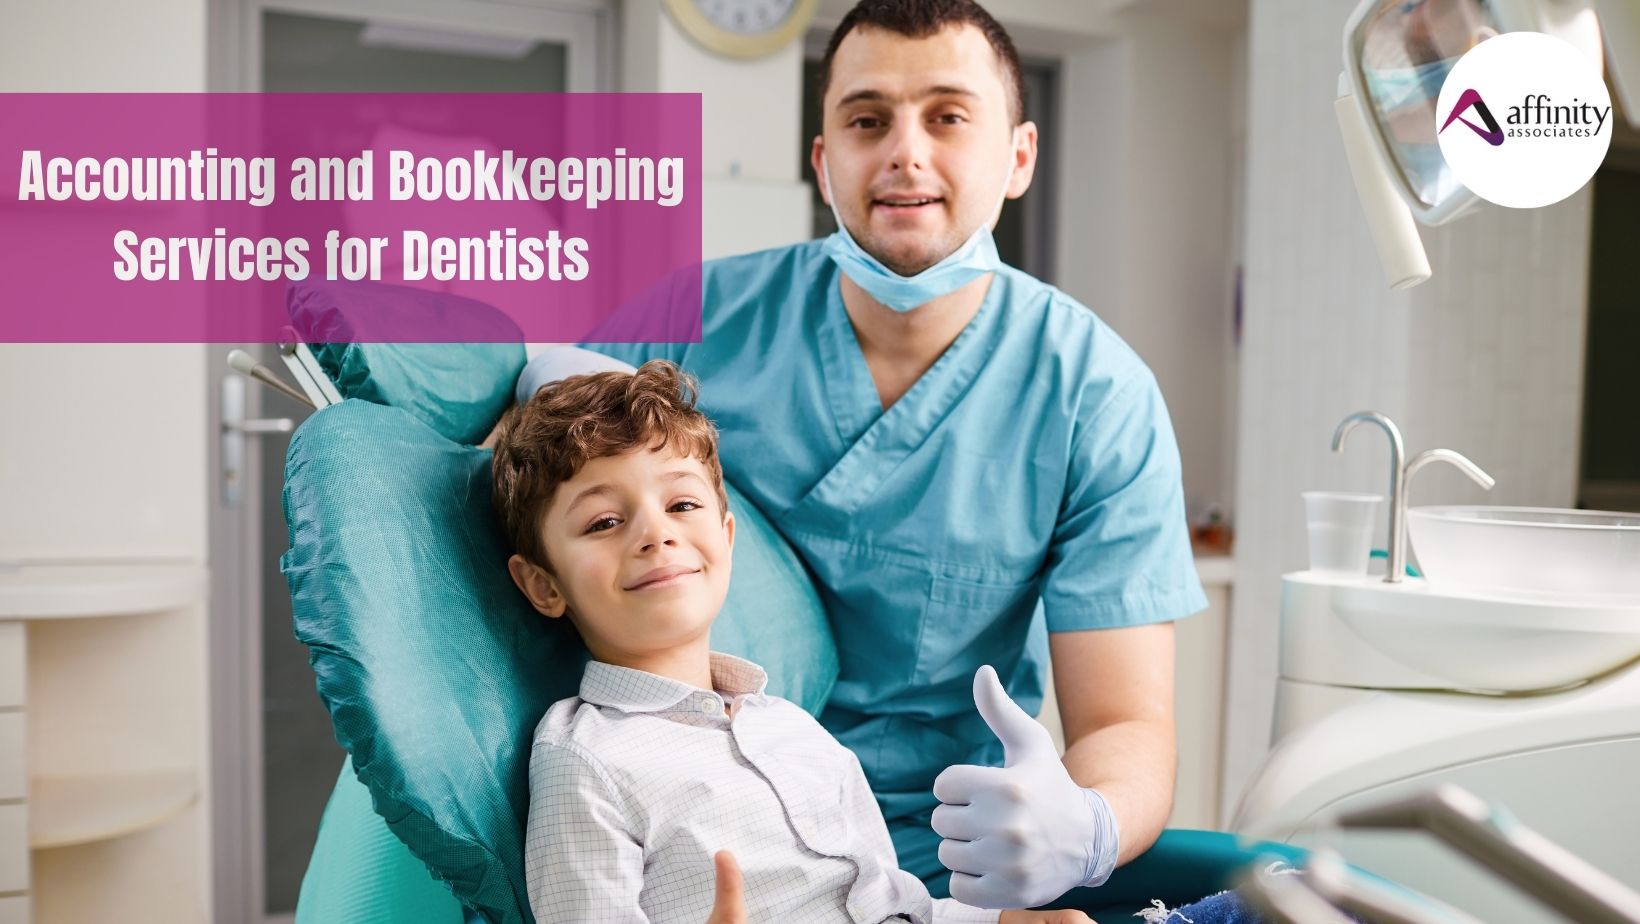 Accounting and Bookkeeping Services for Dentists